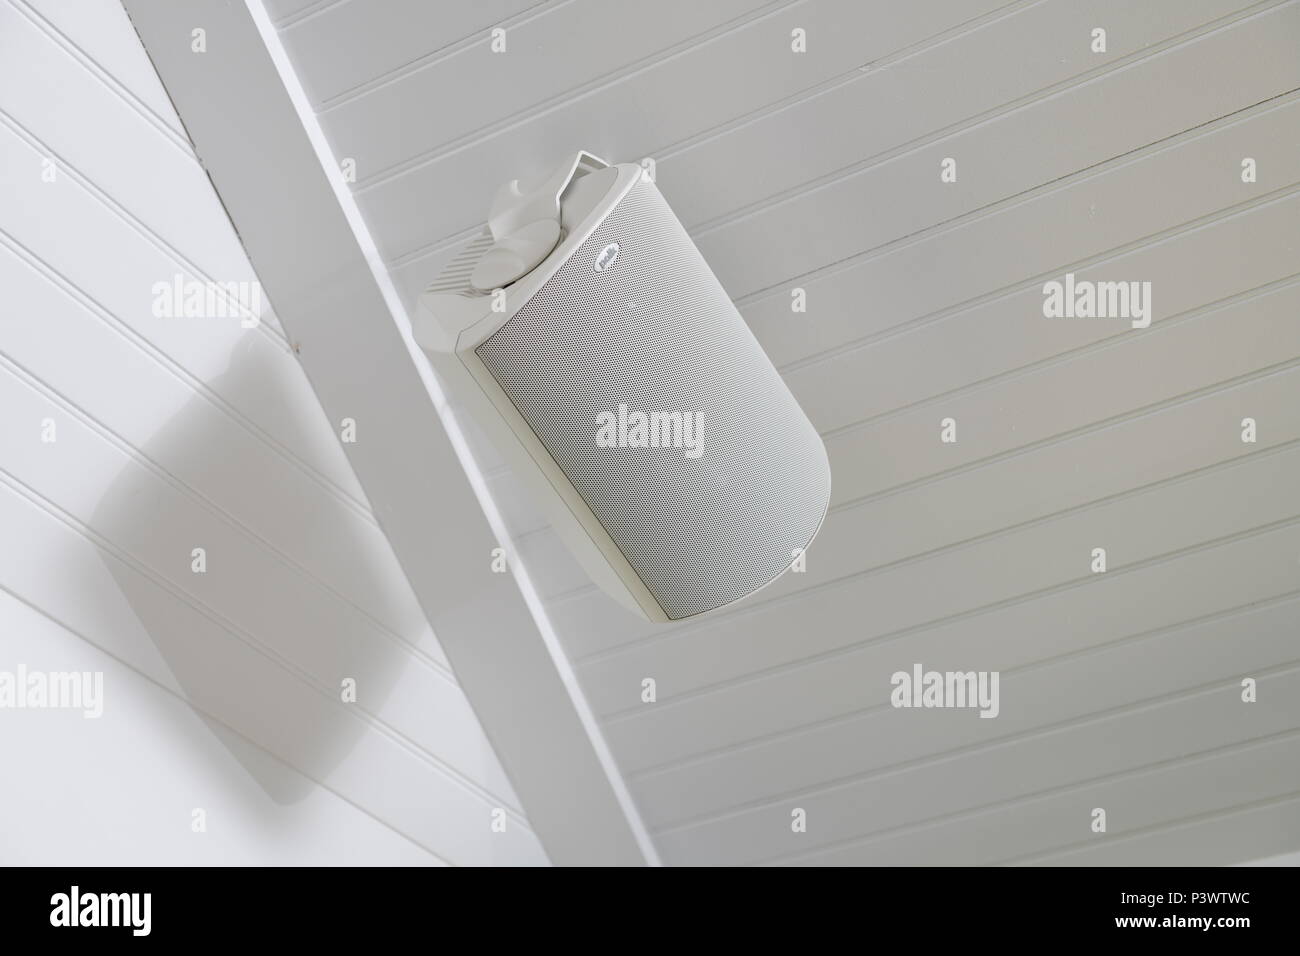 Polk outdoor audio speakers for music and sound in the elements on a porch Stock Photo